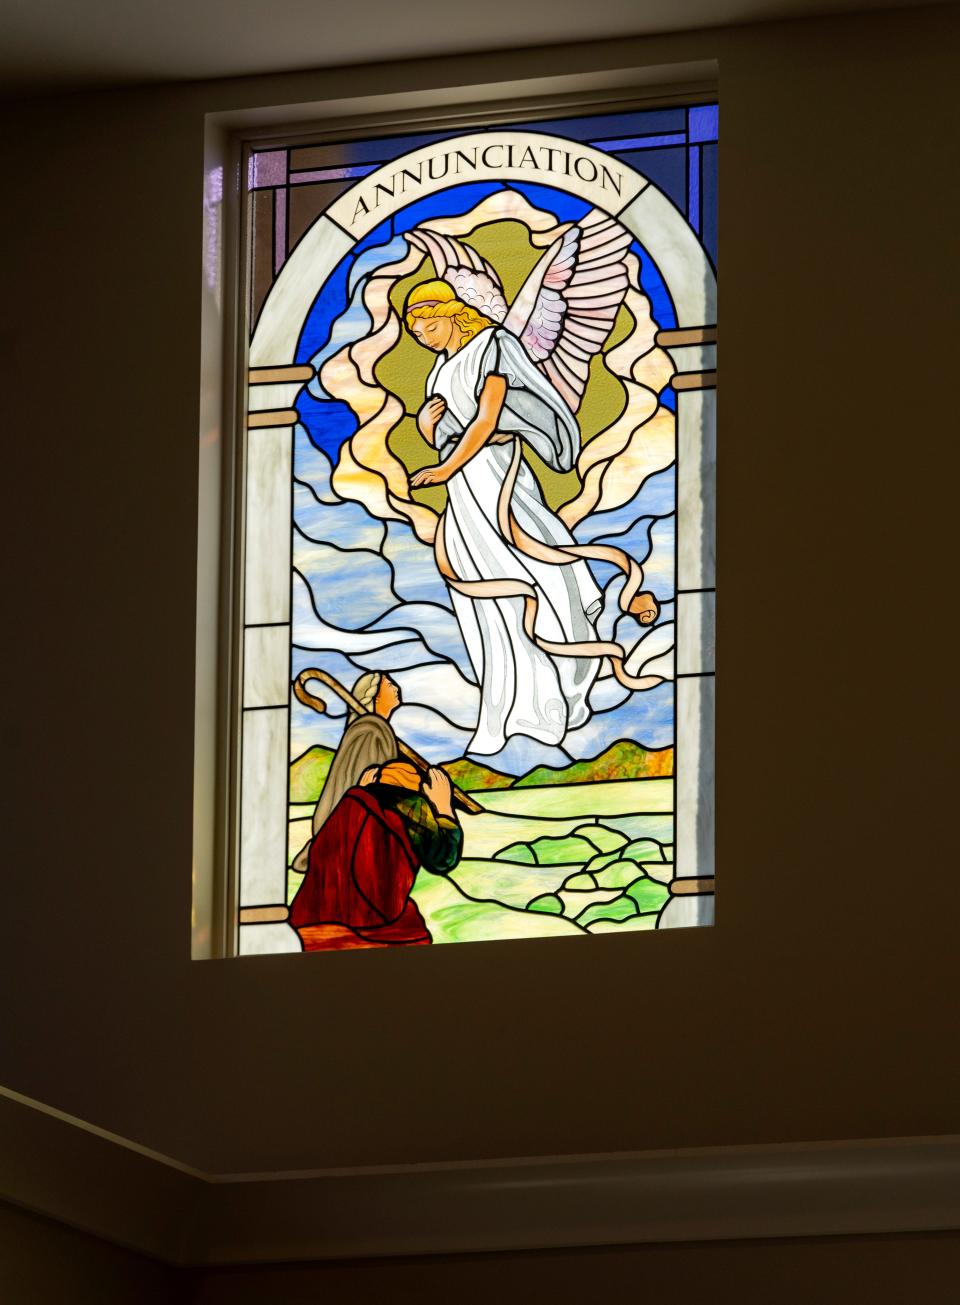 Jan Tuckwood, her sister, Lynn, and brother, Don, purchased the "Annunciation" window, left, in honor of their mother, who died in 2021. It is one of 14 leaded stained glass windows which tell the story of the life of Jesus.